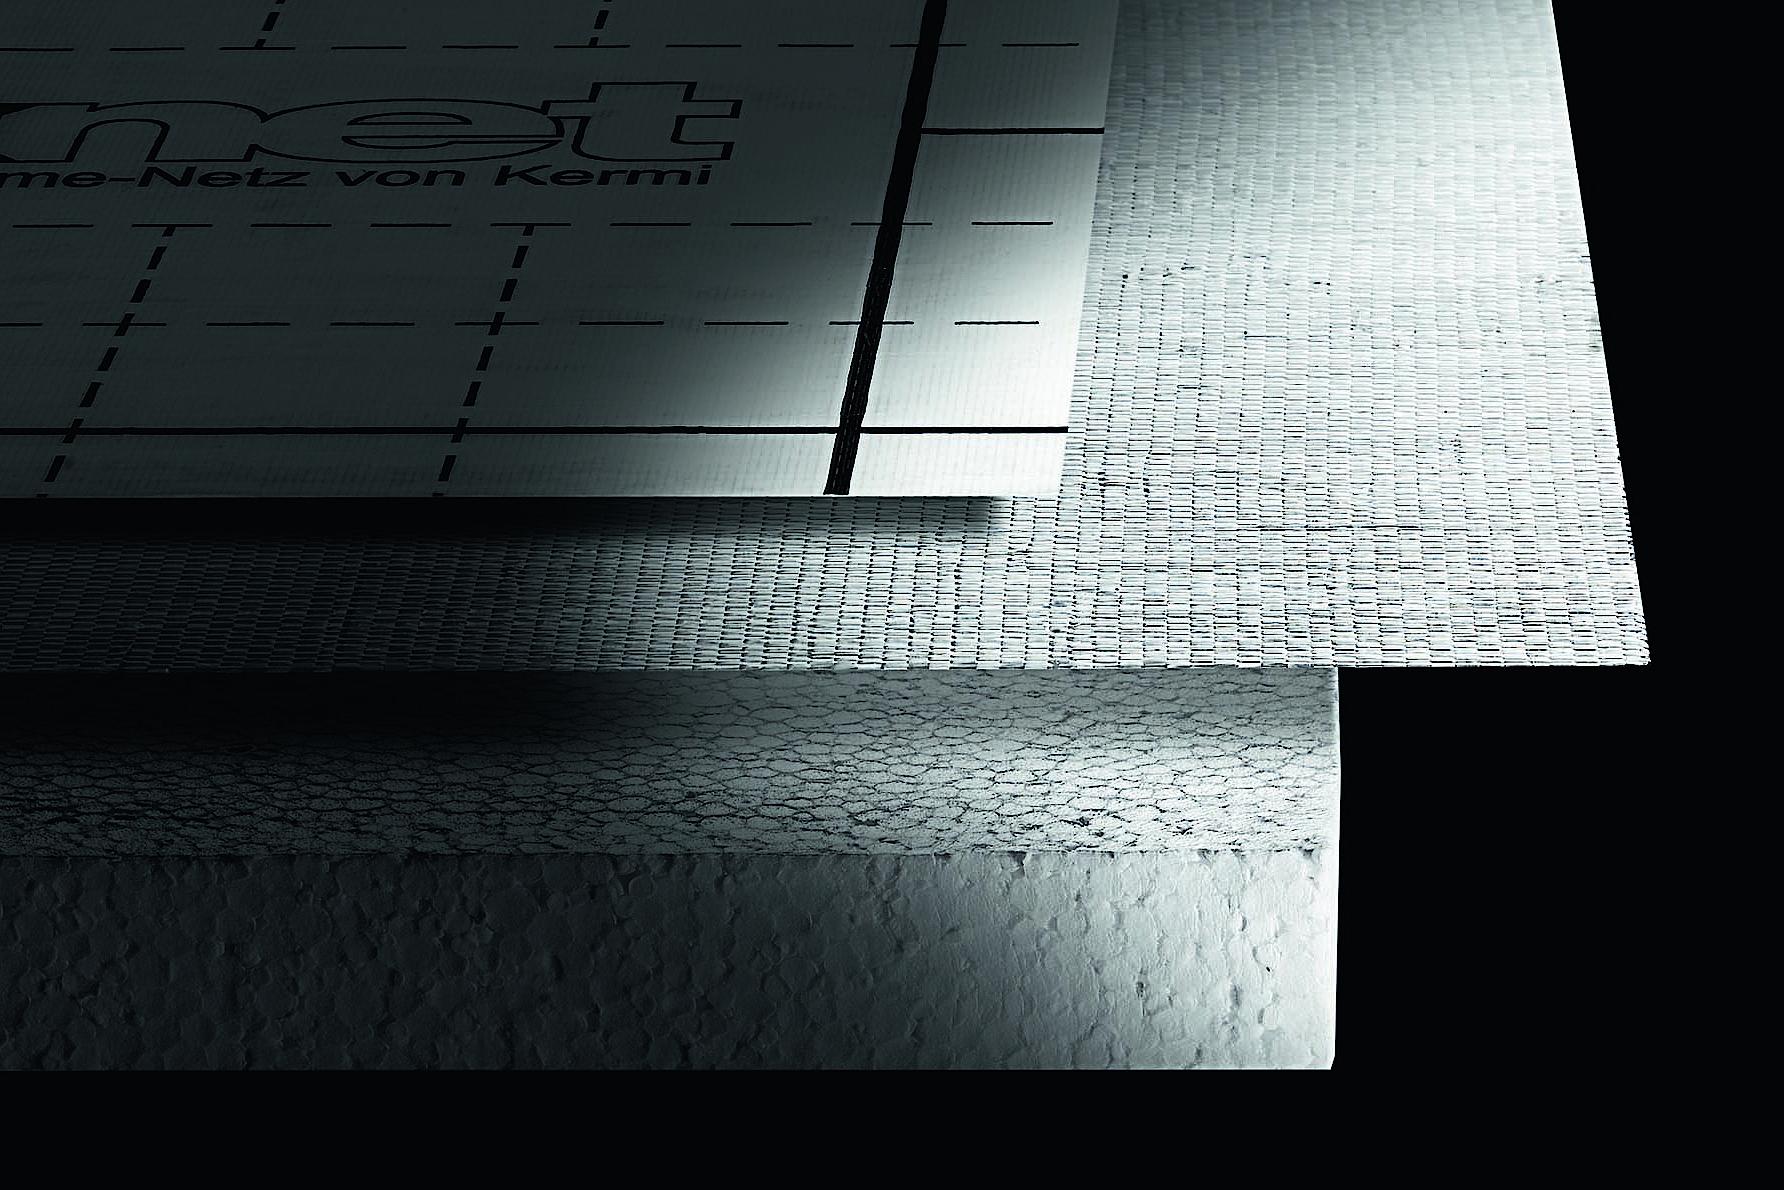 Kermi x-net C12 tacker insulation made of highly tear-resistant woven fabric.